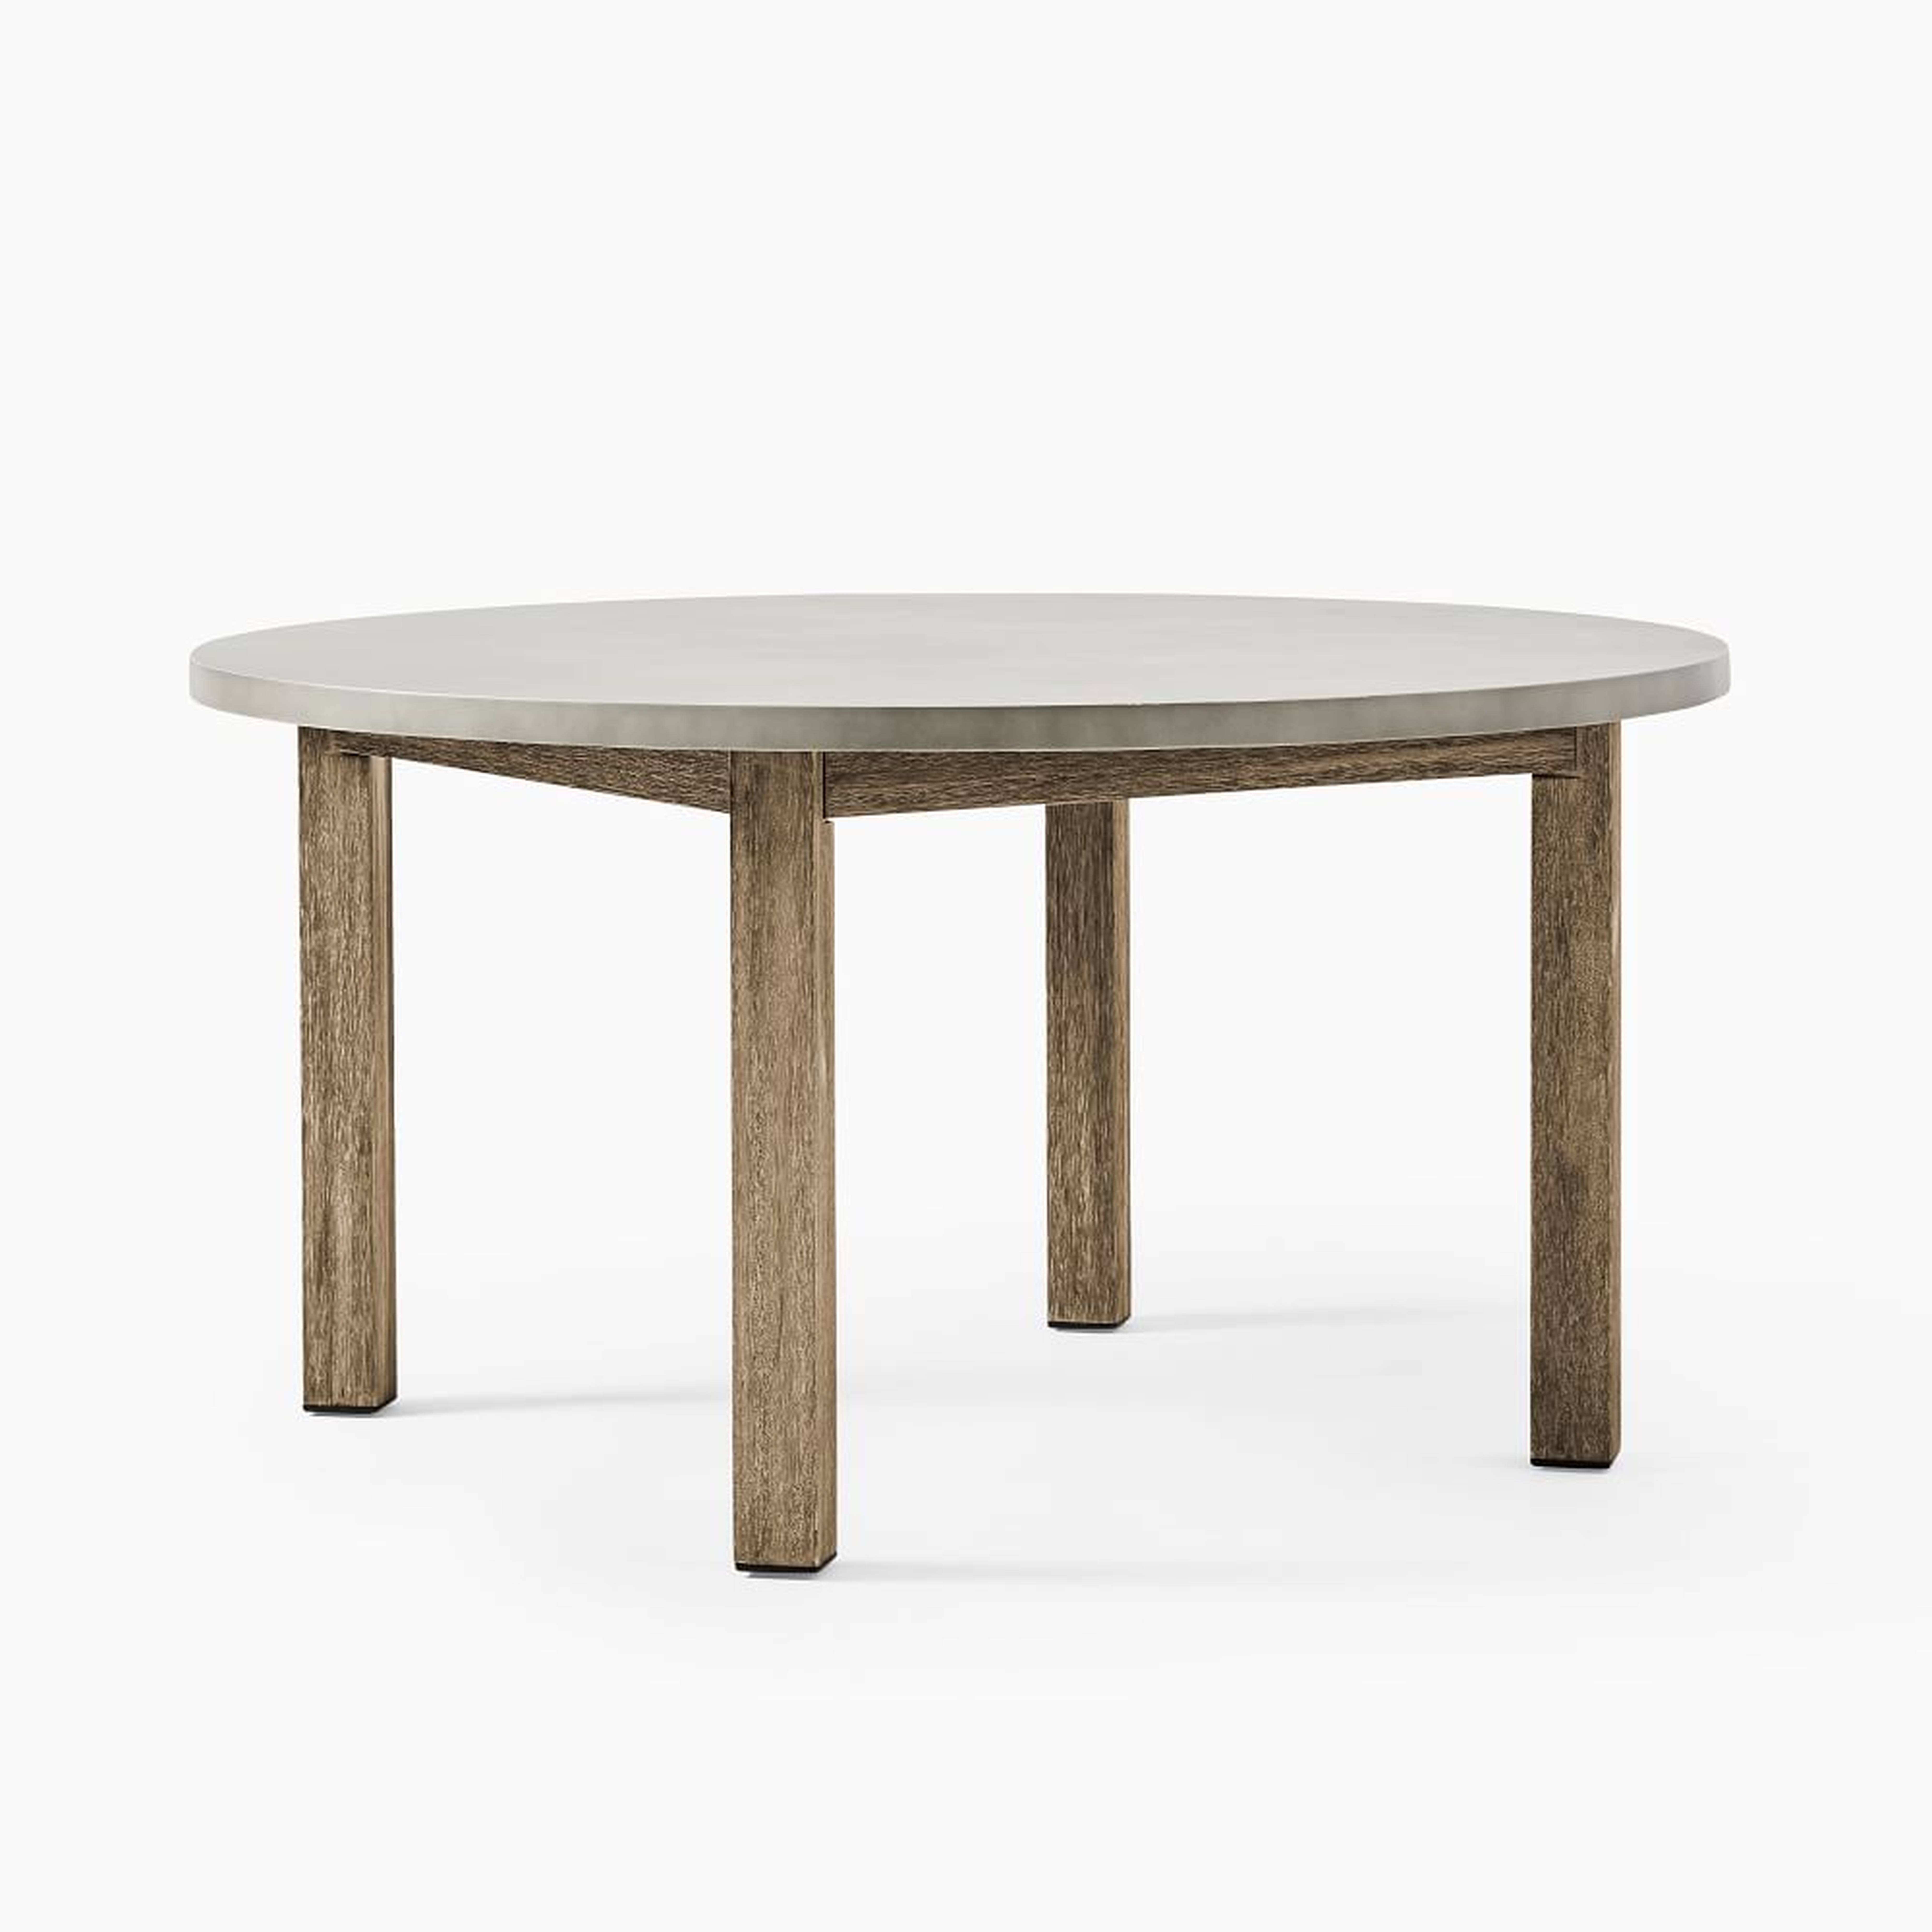 Portside Outdoor Concrete 60 in Round Dining Table, Driftwood - West Elm